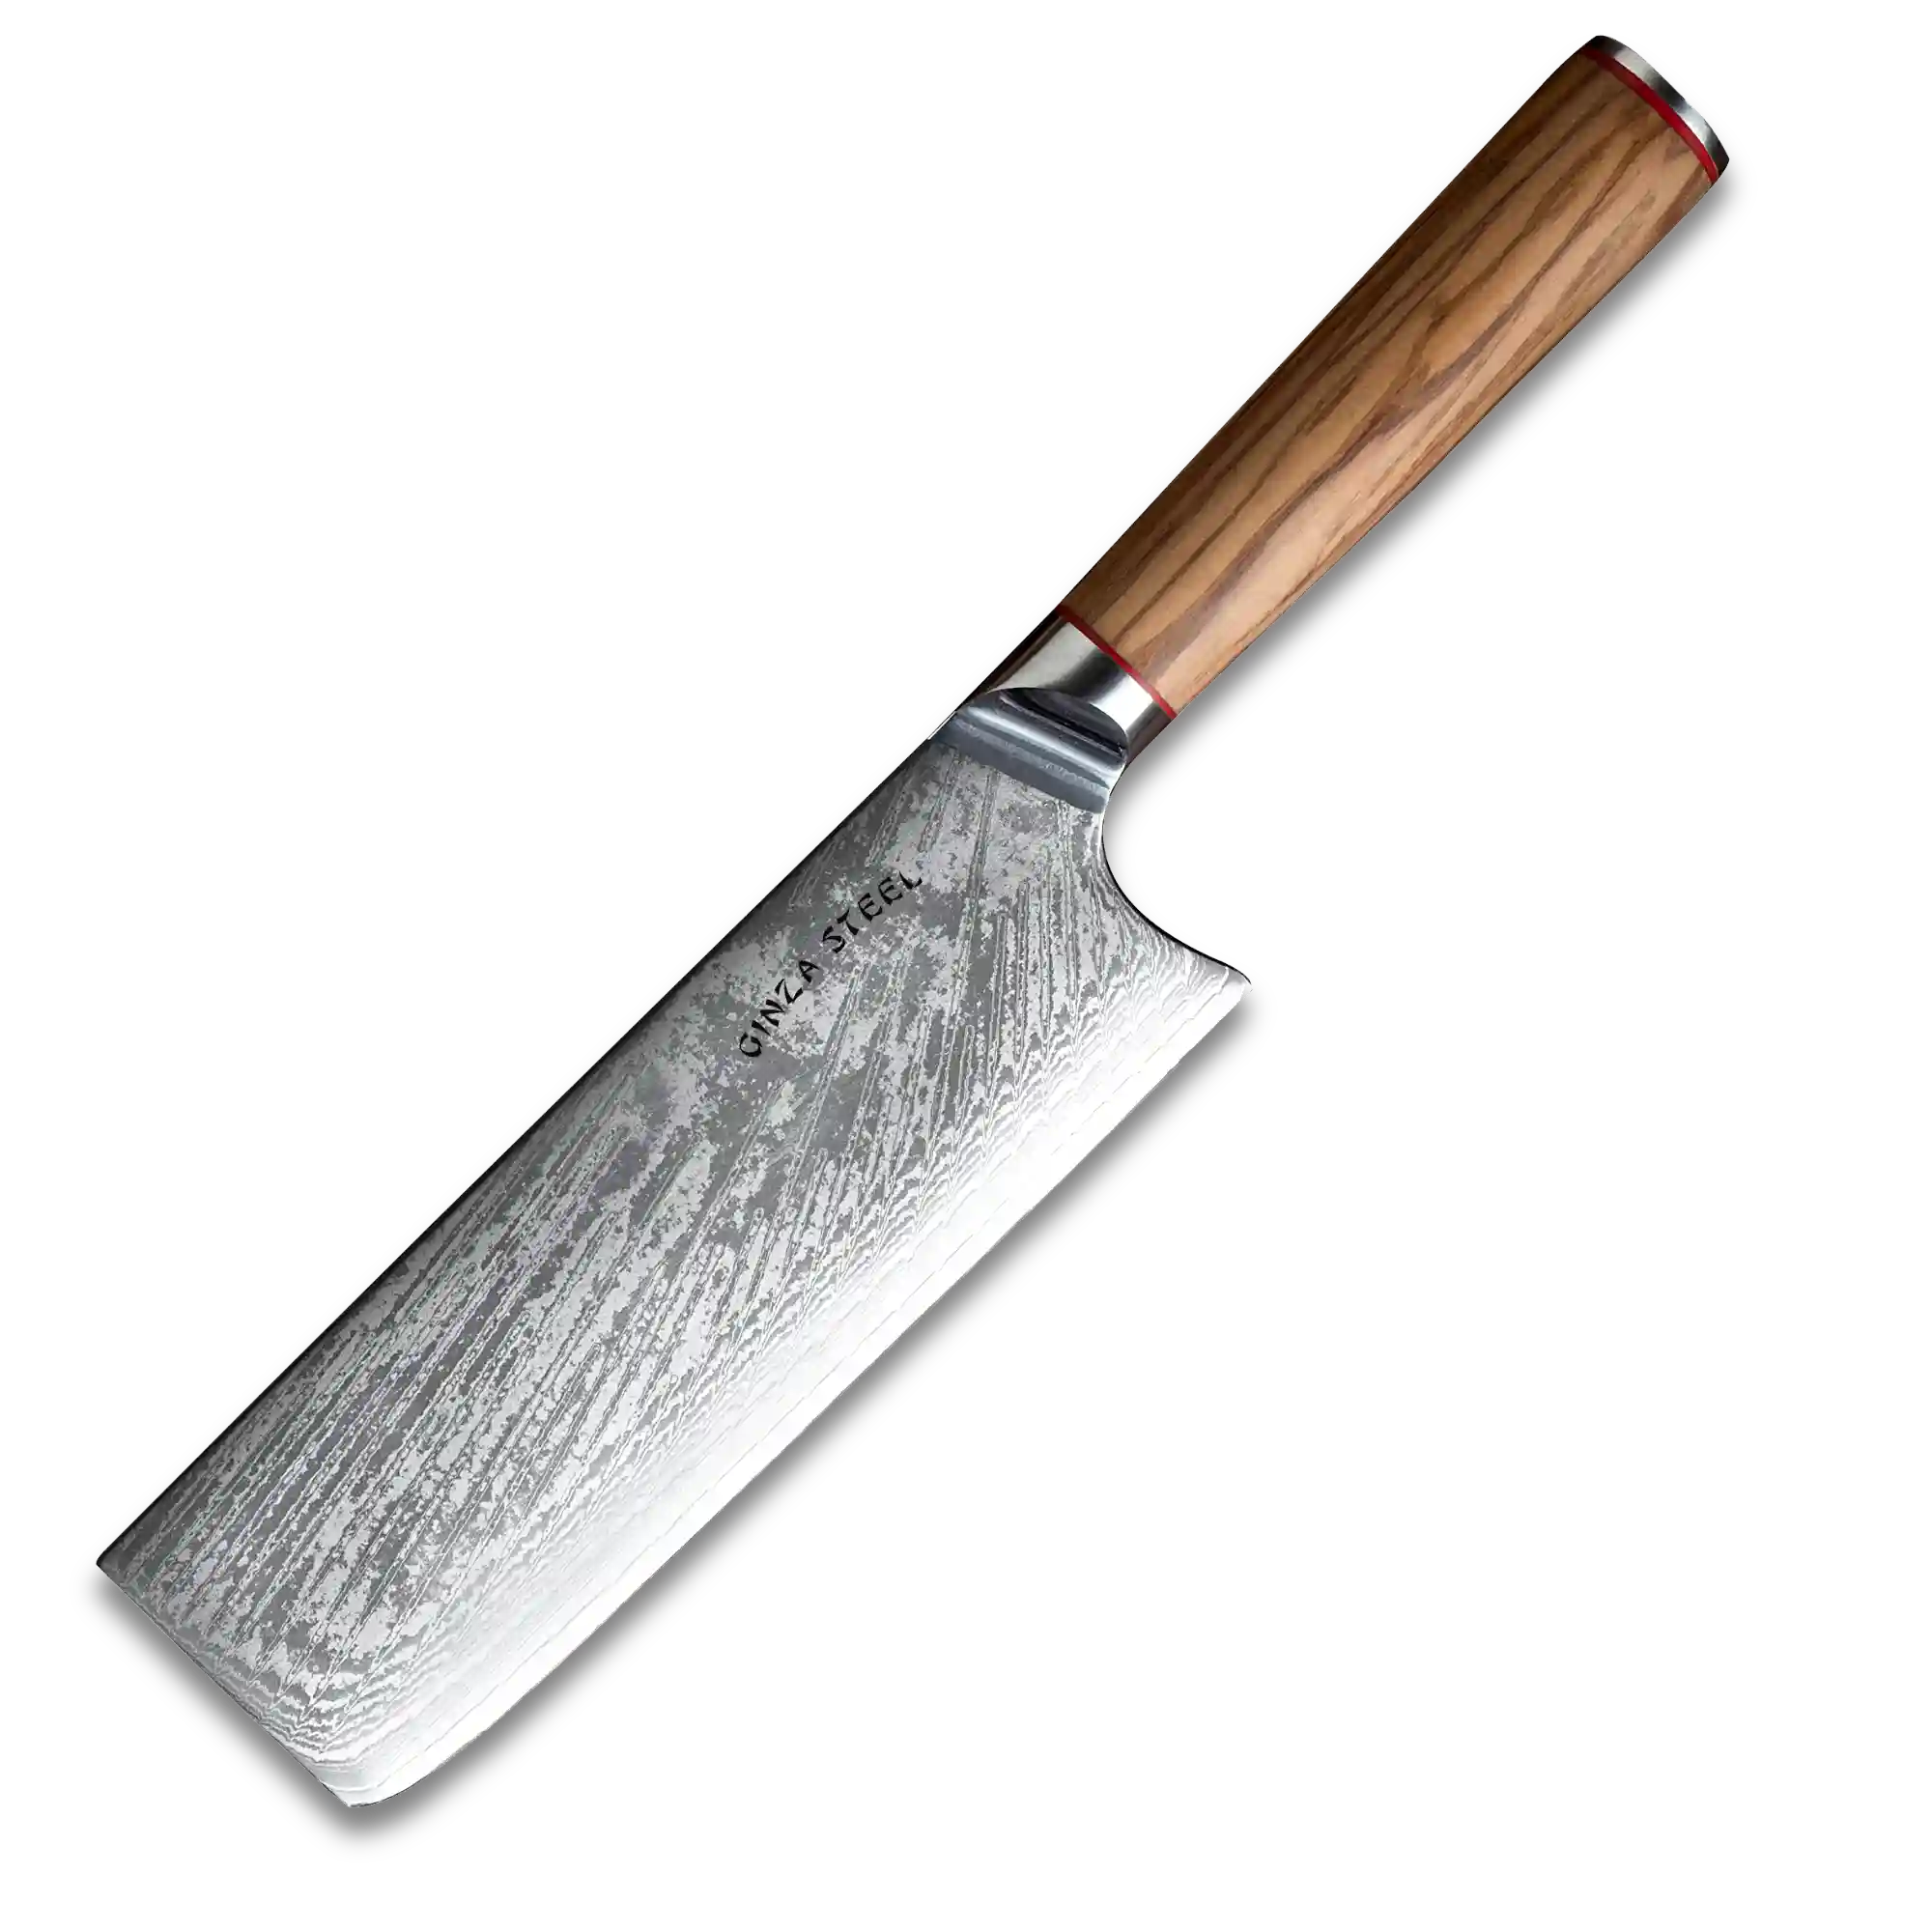 MIA X | Cleaver Knife 7" Damascus AUS10 Steel 67 Layer / Olive Wood handle